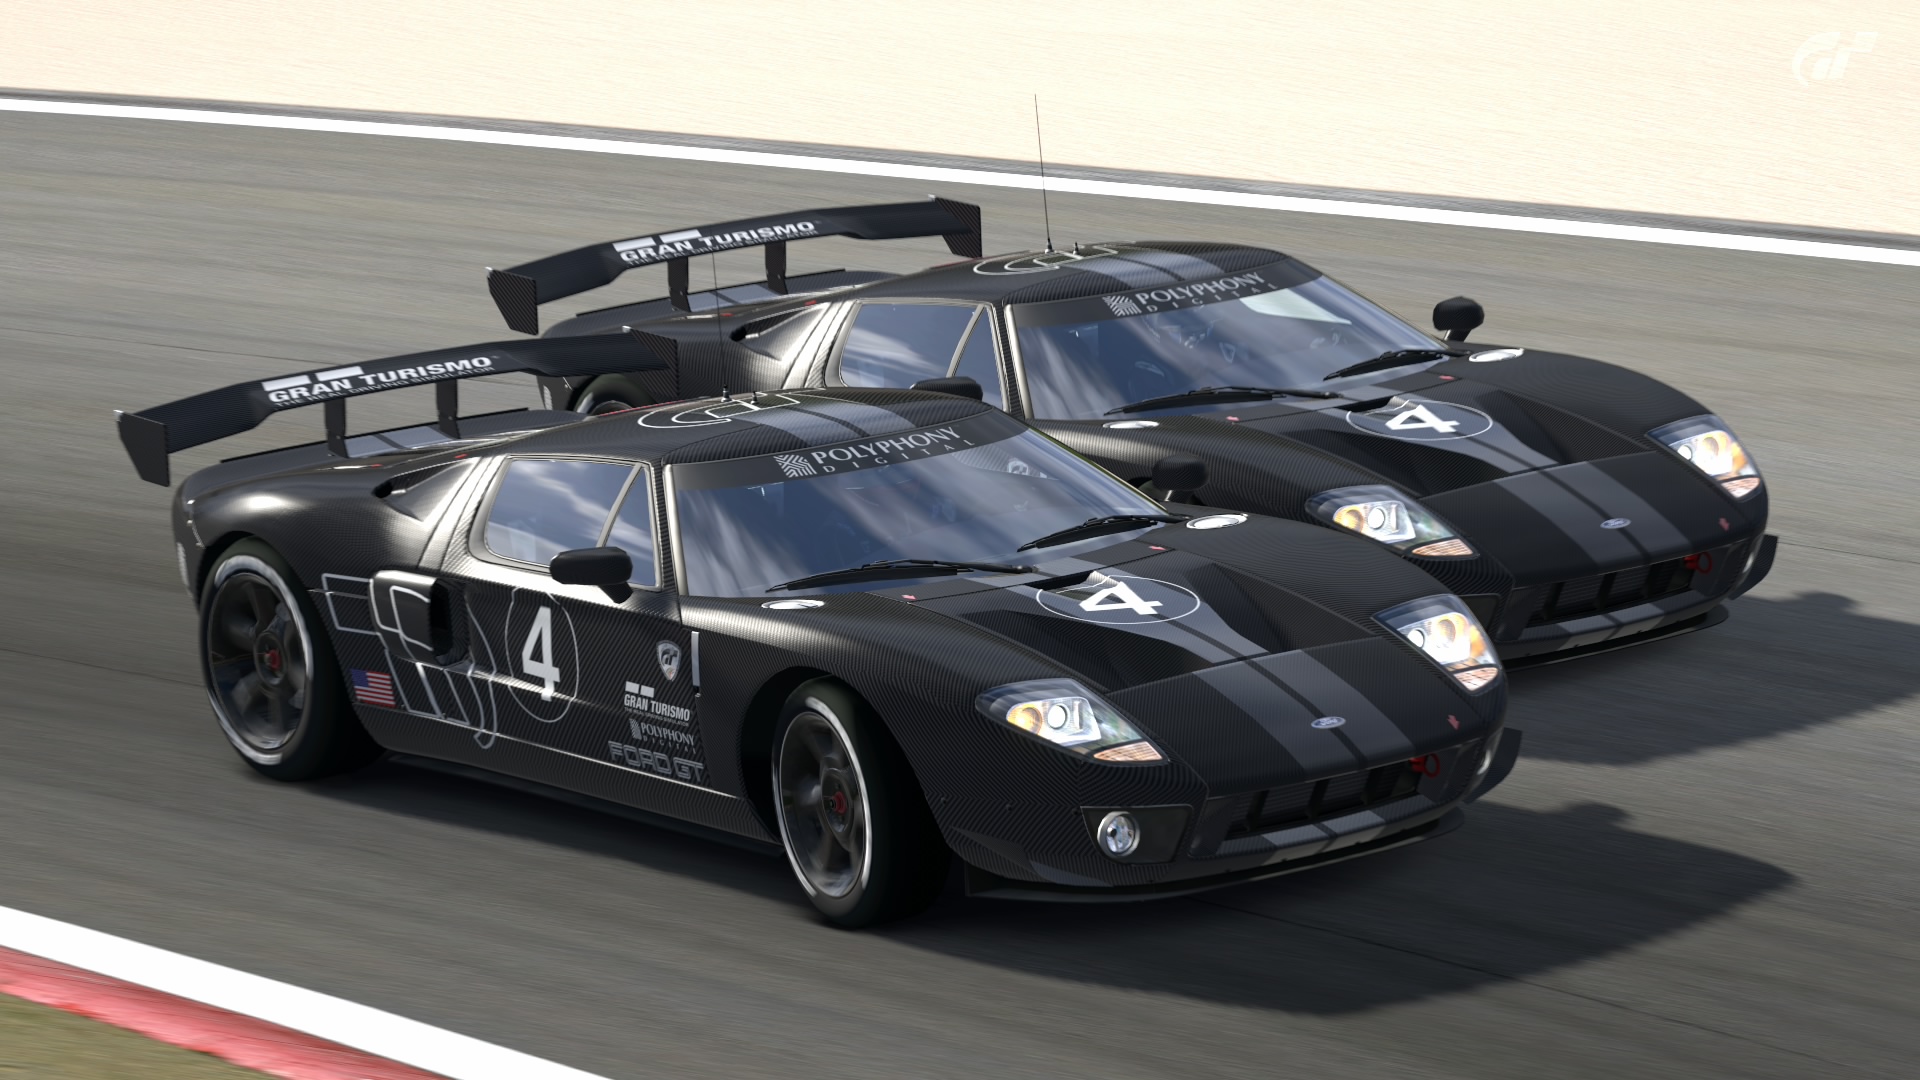 [Image: ford_gt_lm_racecar__by_falcone_nostra-d52h35r.jpg]